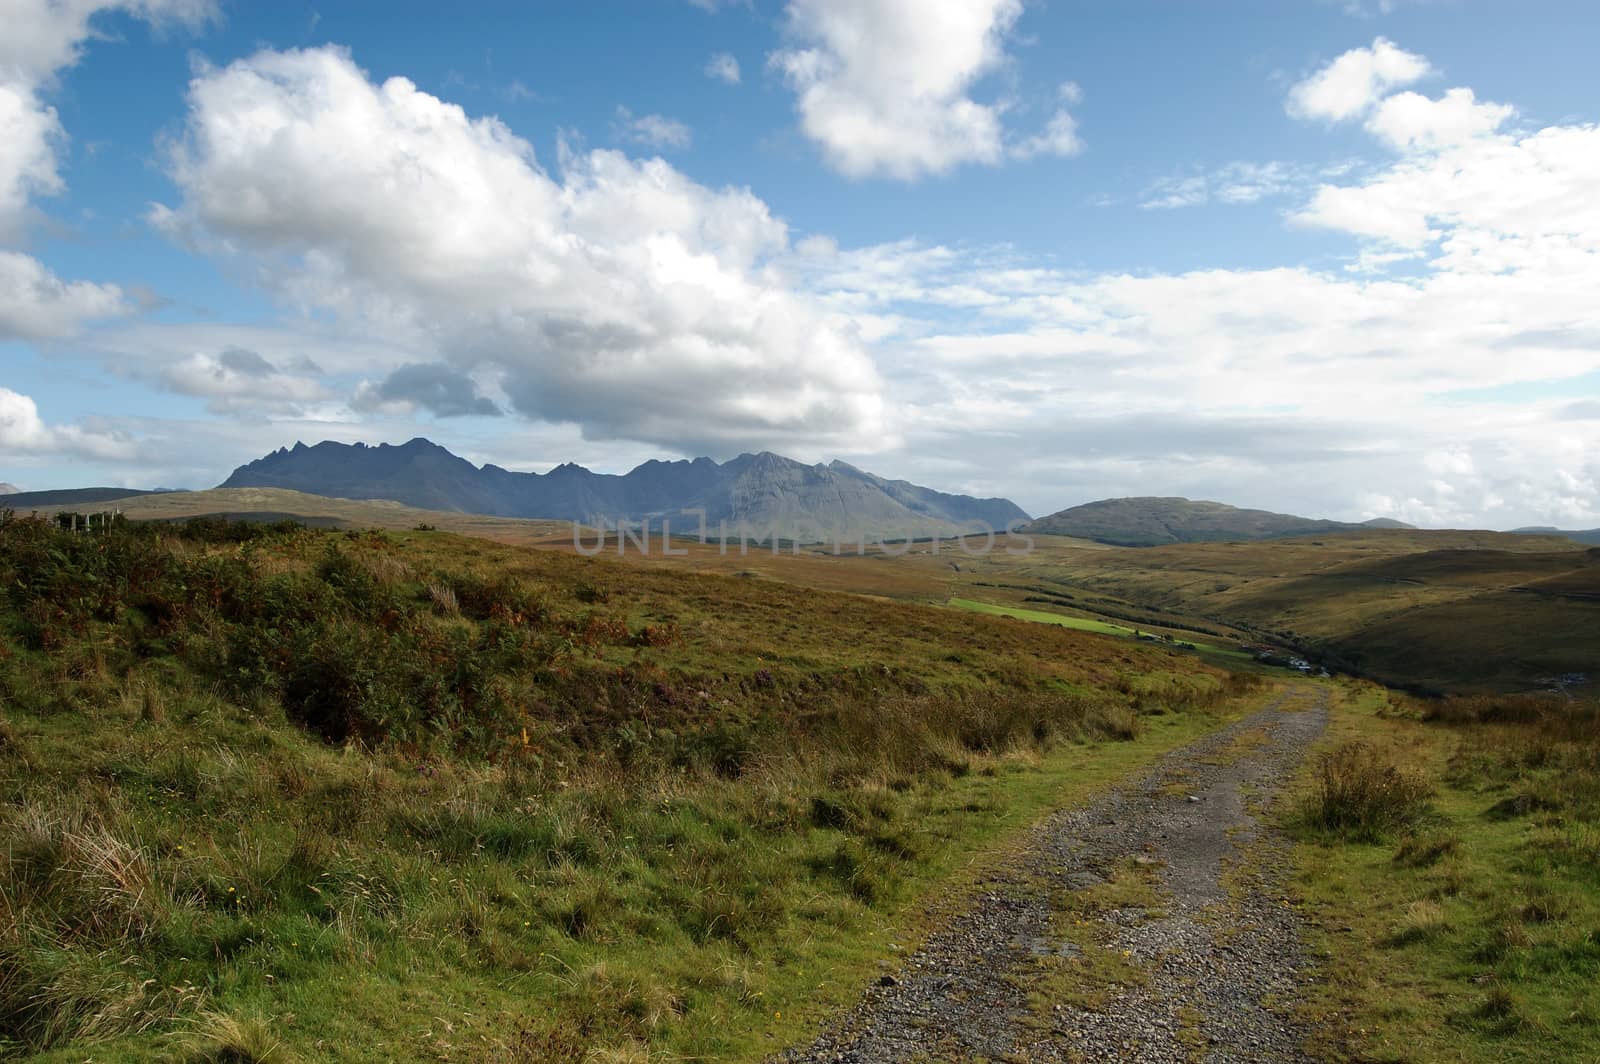 The Cuillins of Skye from a viewpoint near Carbostmore on the west coast with an old road in the foreground